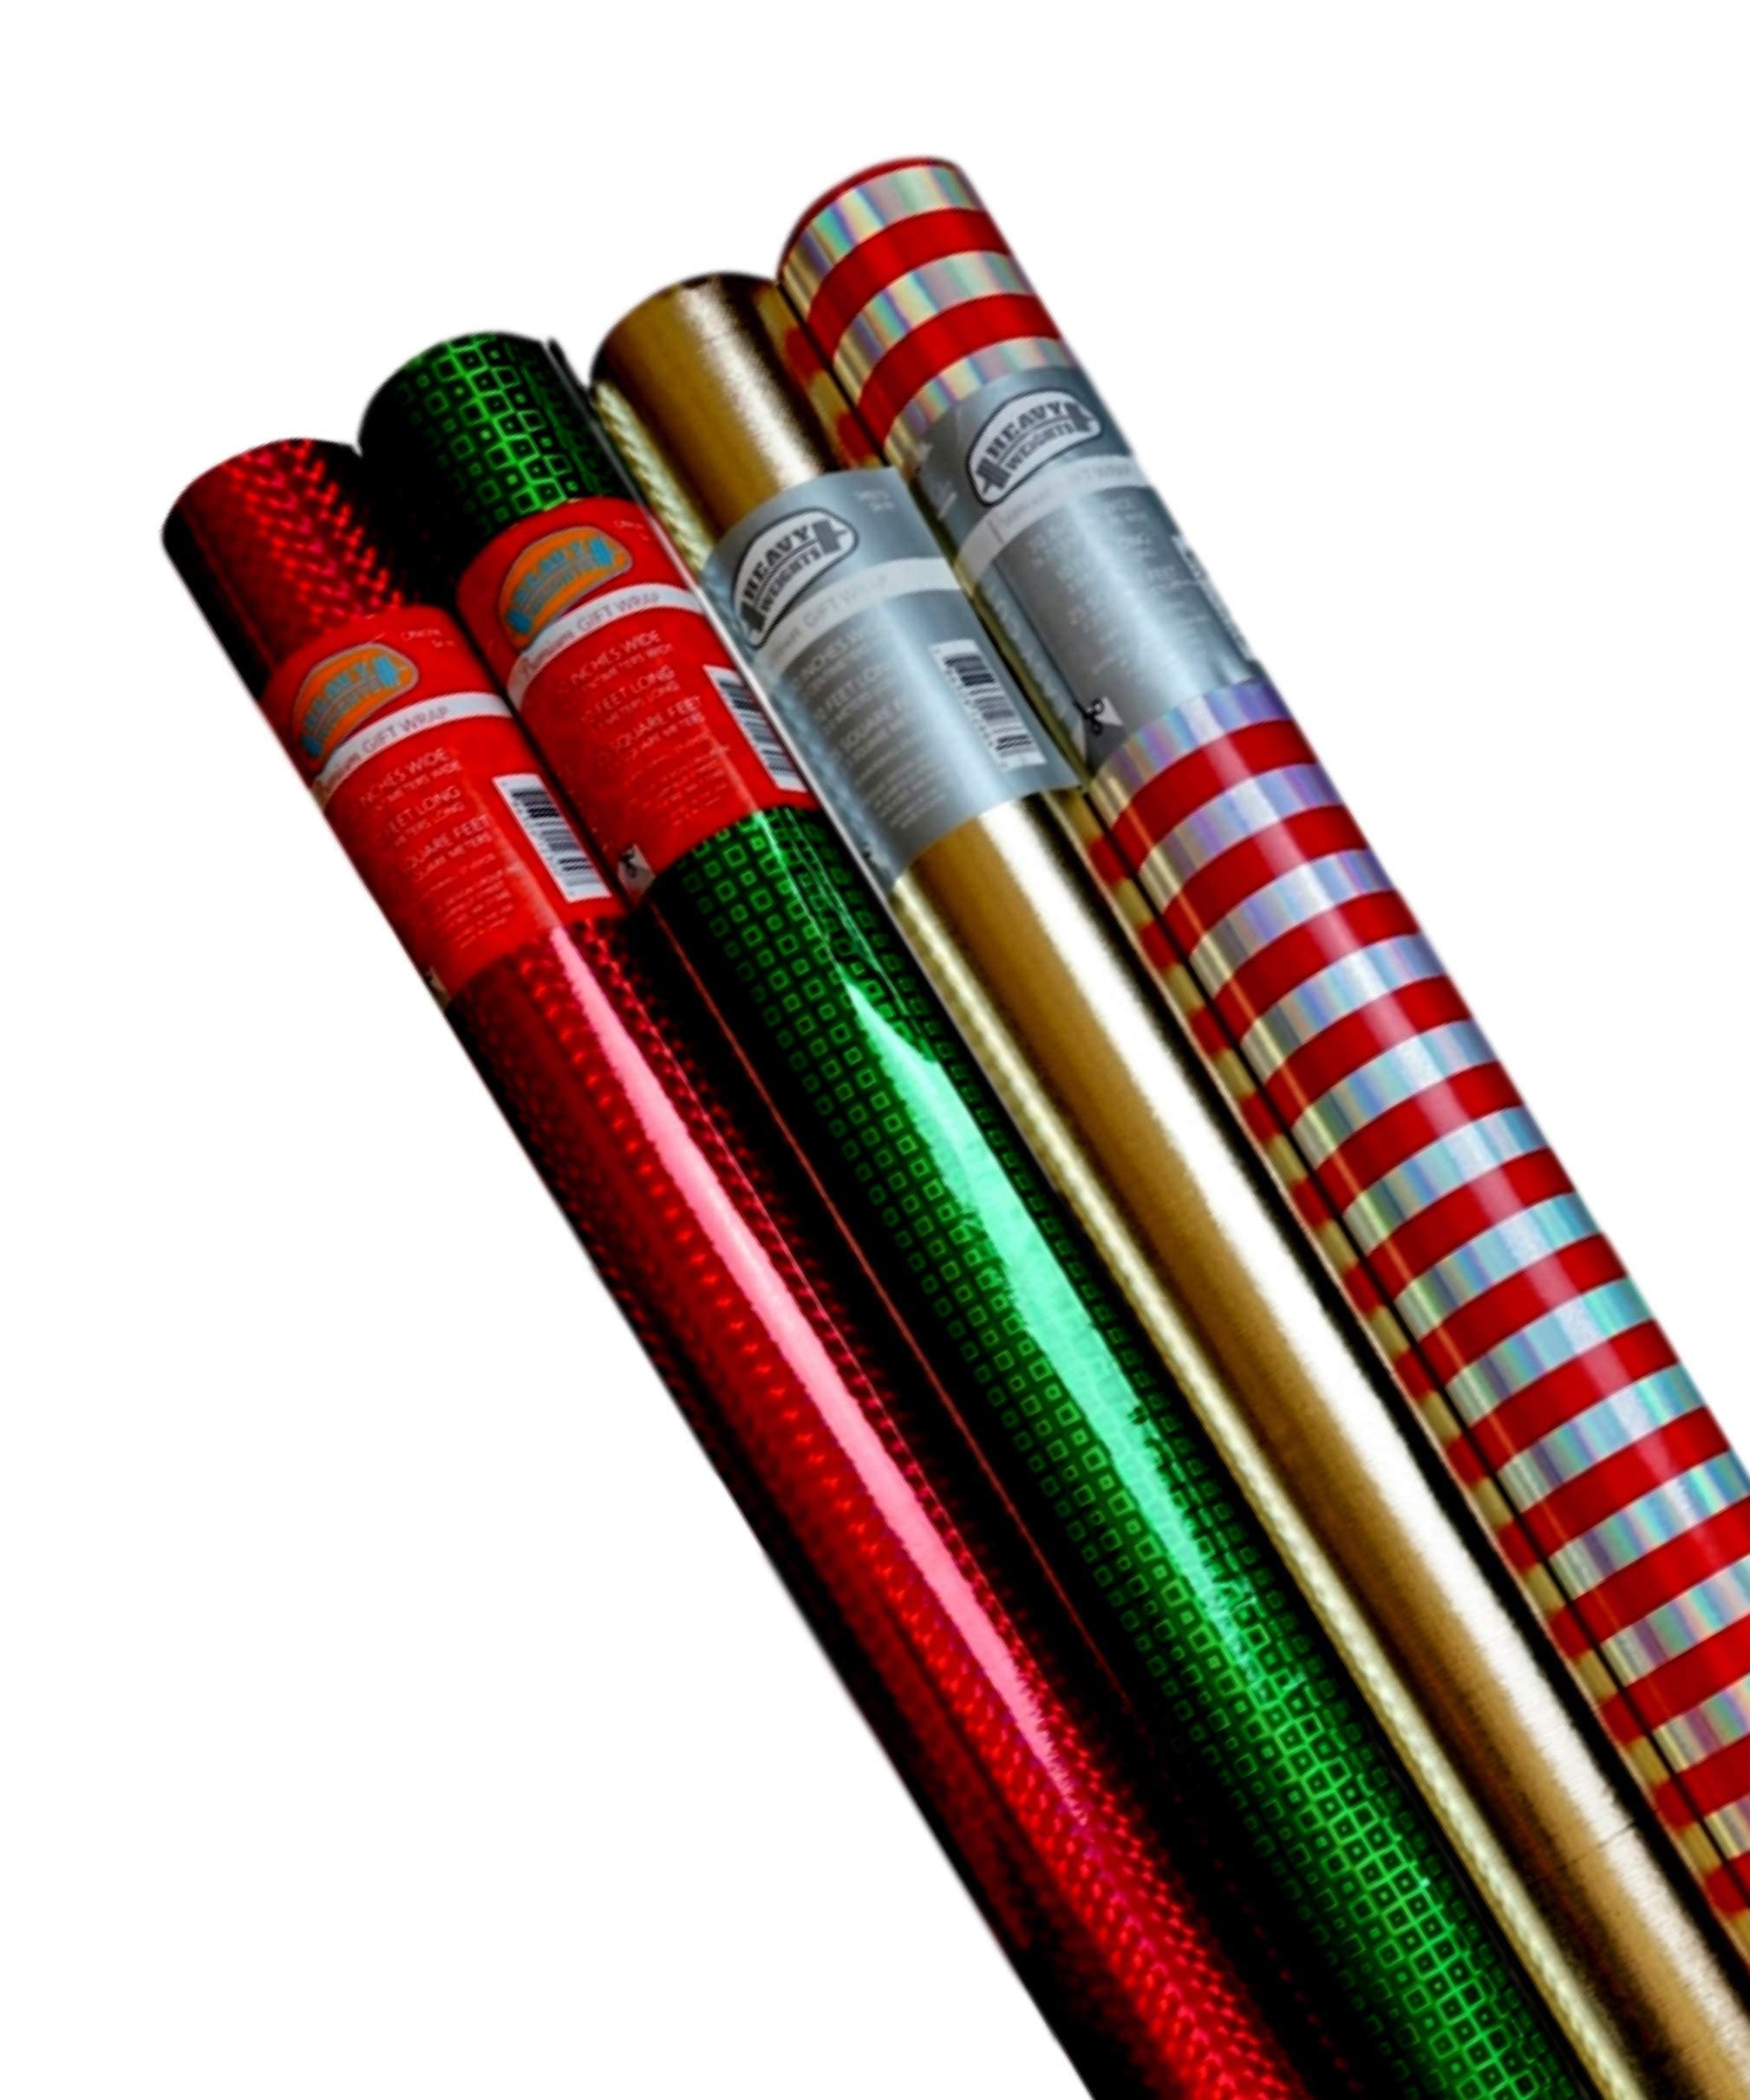 Premium Gift Wrap (4 Rolls, 100 sq ft Total) Heavy Weight Shiny Metallic  Wrapping Paper Colors Vary